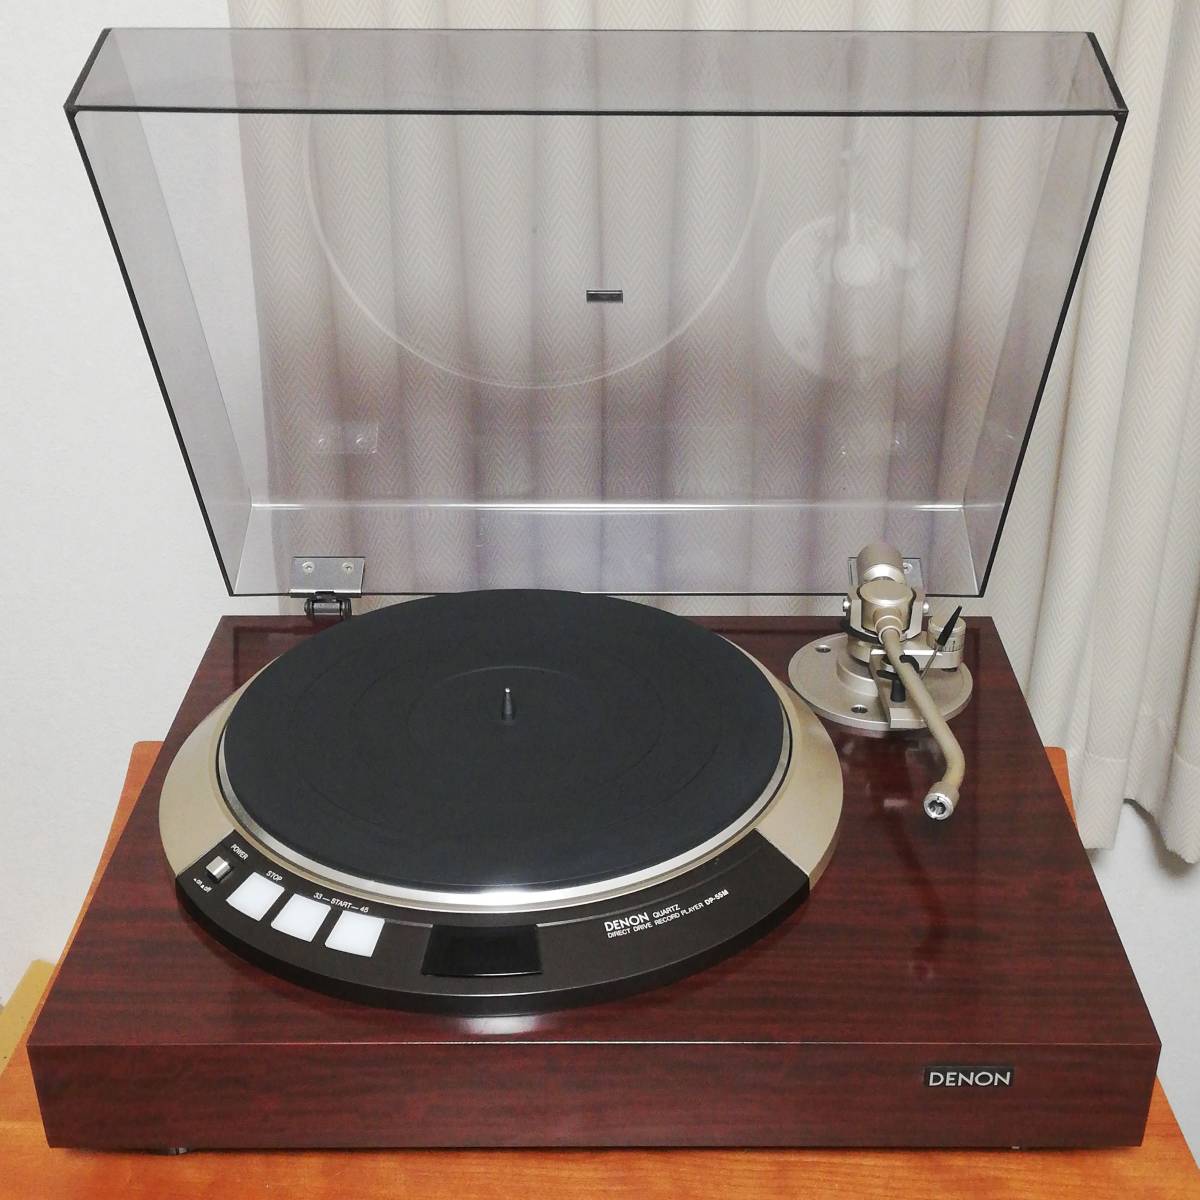  beautiful goods!! operation excellent DENON( Denon ten on ) DP-55M quartz lock installing manual Direct Drive record player made in Japan MADE IN JAPAN